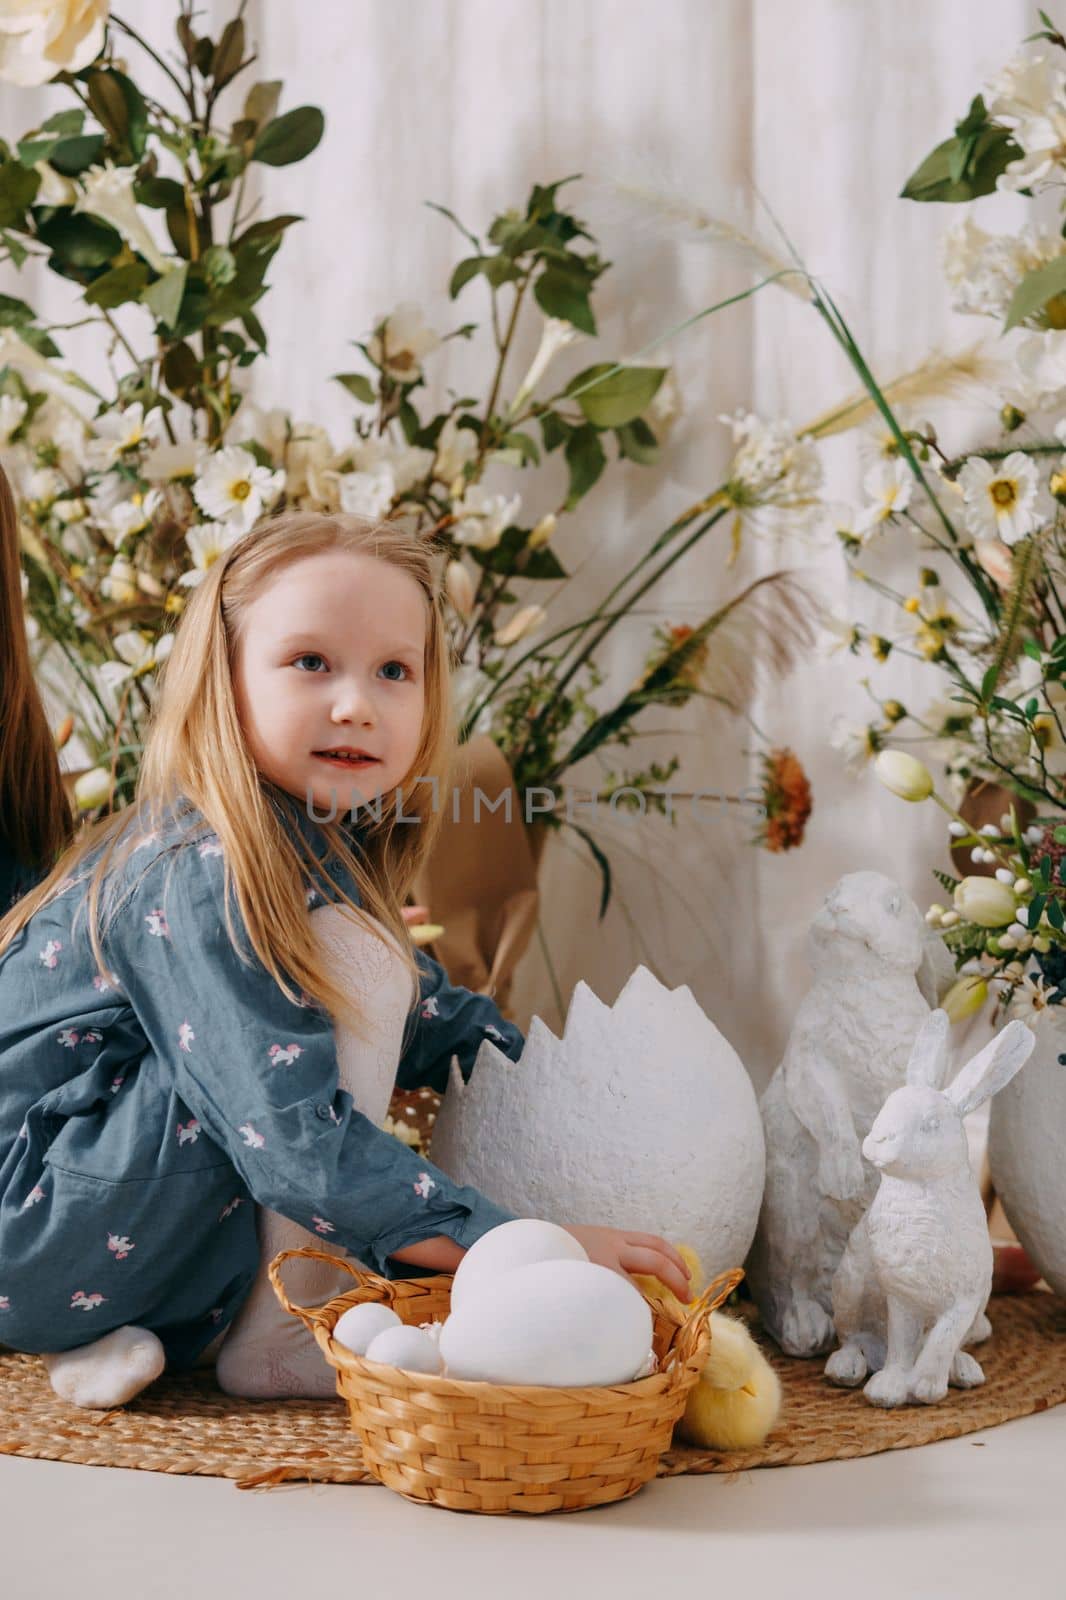 Two girls in a beautiful Easter photo zone with flowers, eggs, chickens and Easter bunnies. Happy Easter holiday. by Annu1tochka